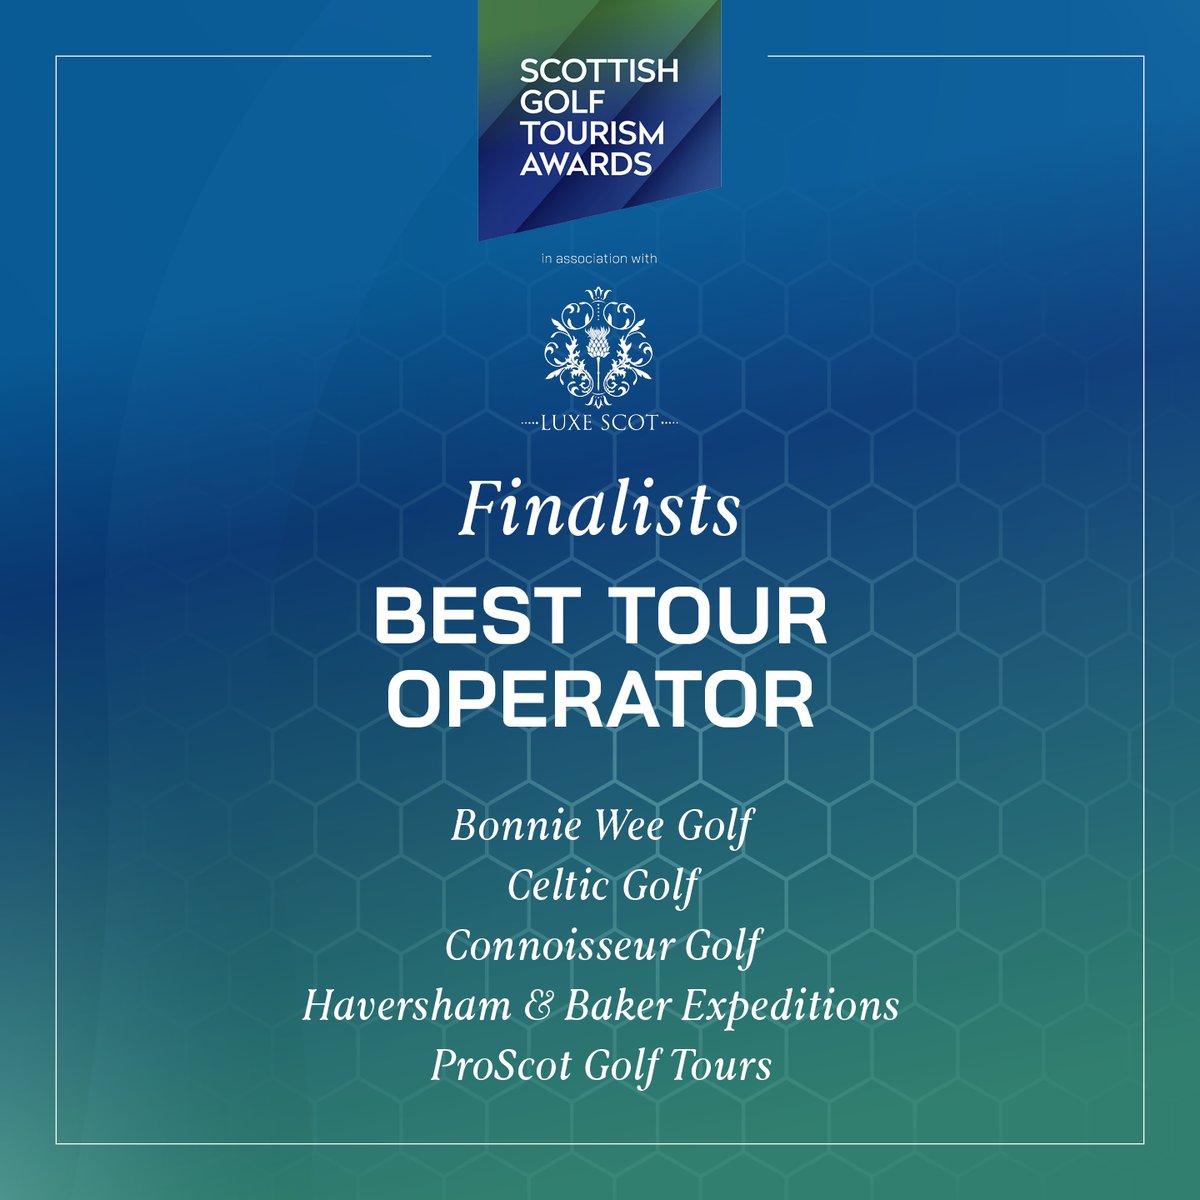 Introducing the finalists for the Best Tour Operator category:

@BonnieWeeGolf 
@CelticGolf 
@connoisseurgolf 
@HavershamBaker 
@Proscotgolf 

For more information, visit the link below:

bit.ly/SGTA2024